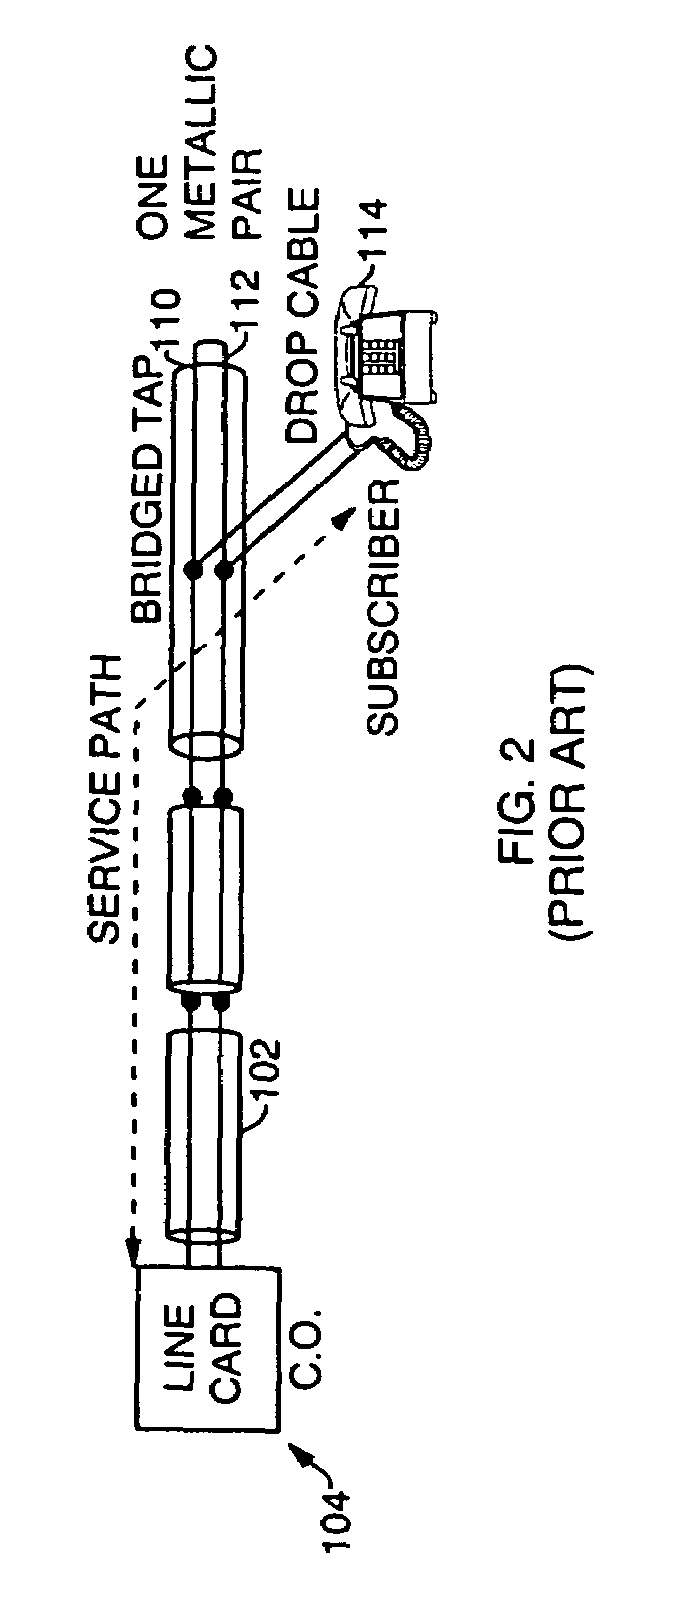 Method and apparatus for service multiplexing over telephone networks which employ bridged tap construction